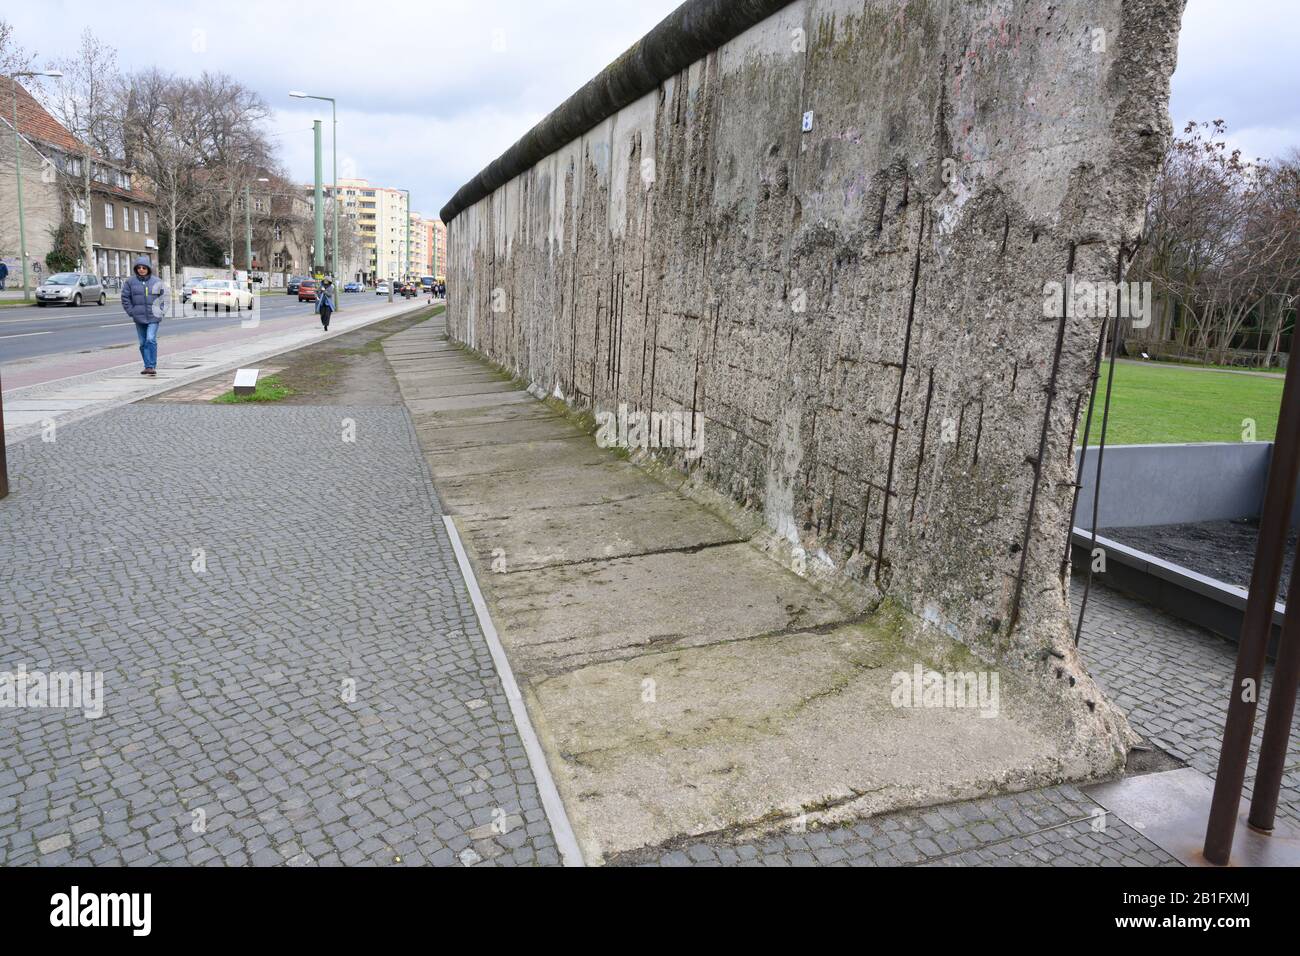 Preserved section of the Berlin Wall which commemorates those who died trying to escape, Berauer Strasse Stock Photo